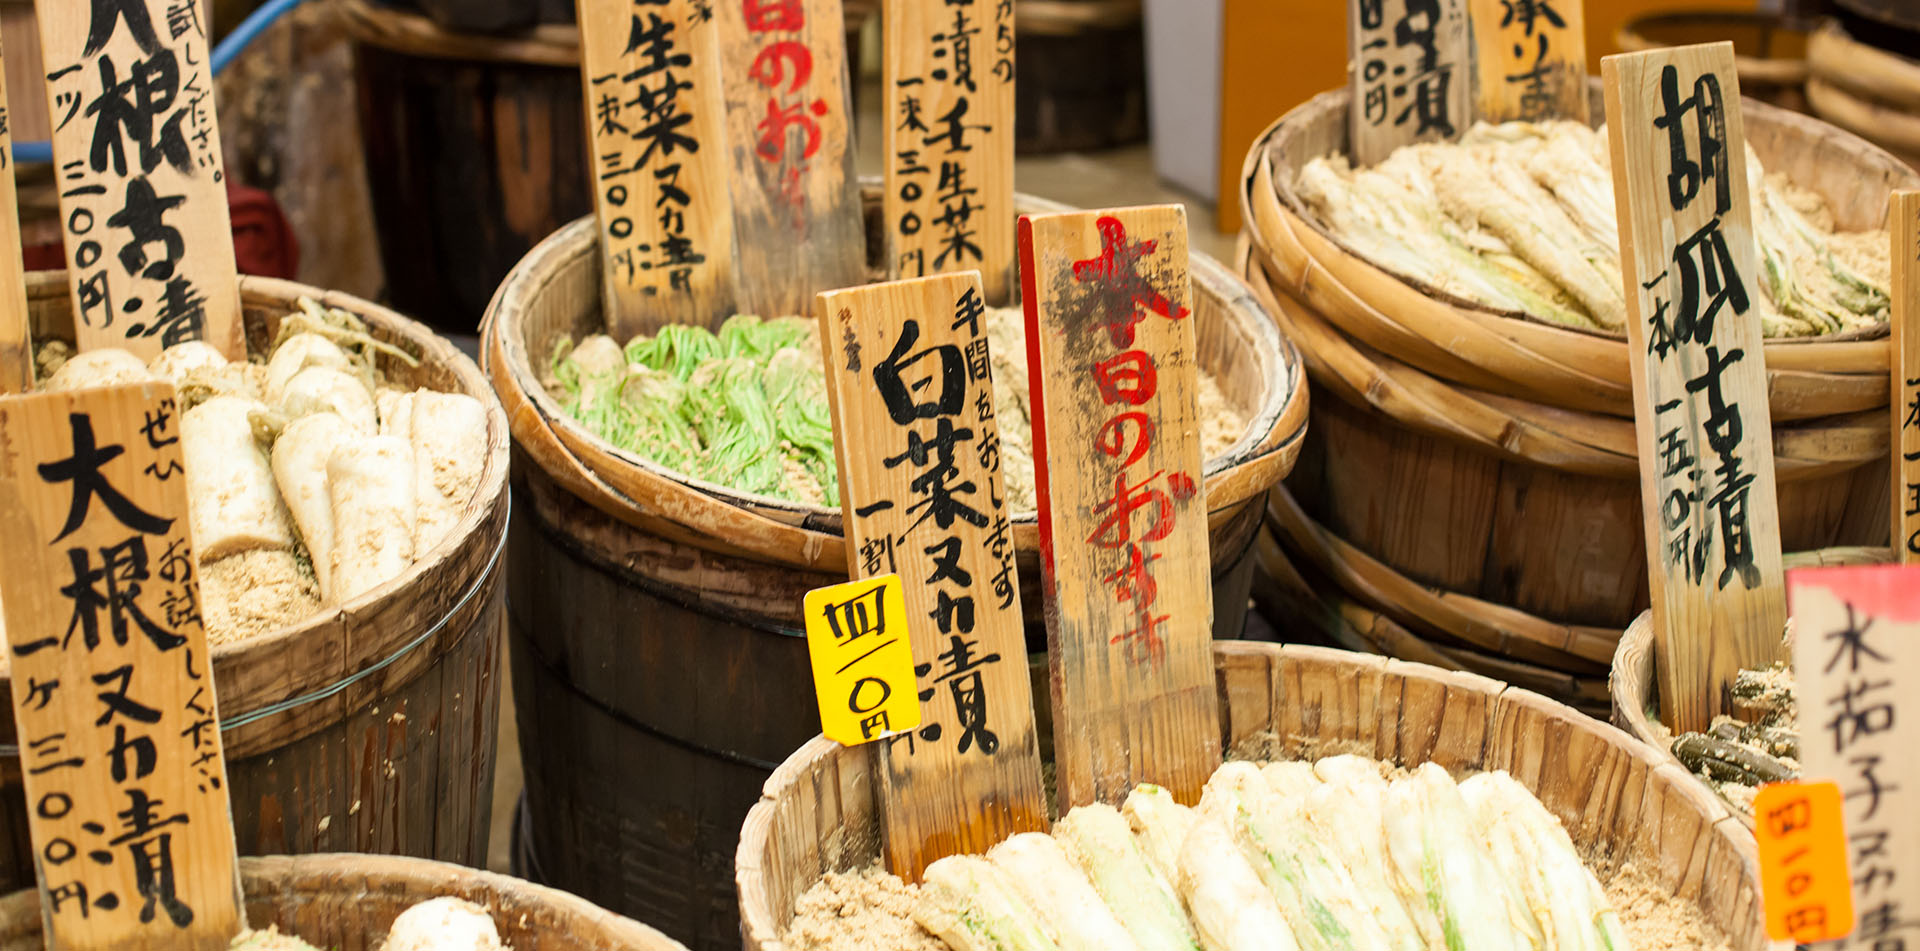 Traditional market in Tokyo, Japan